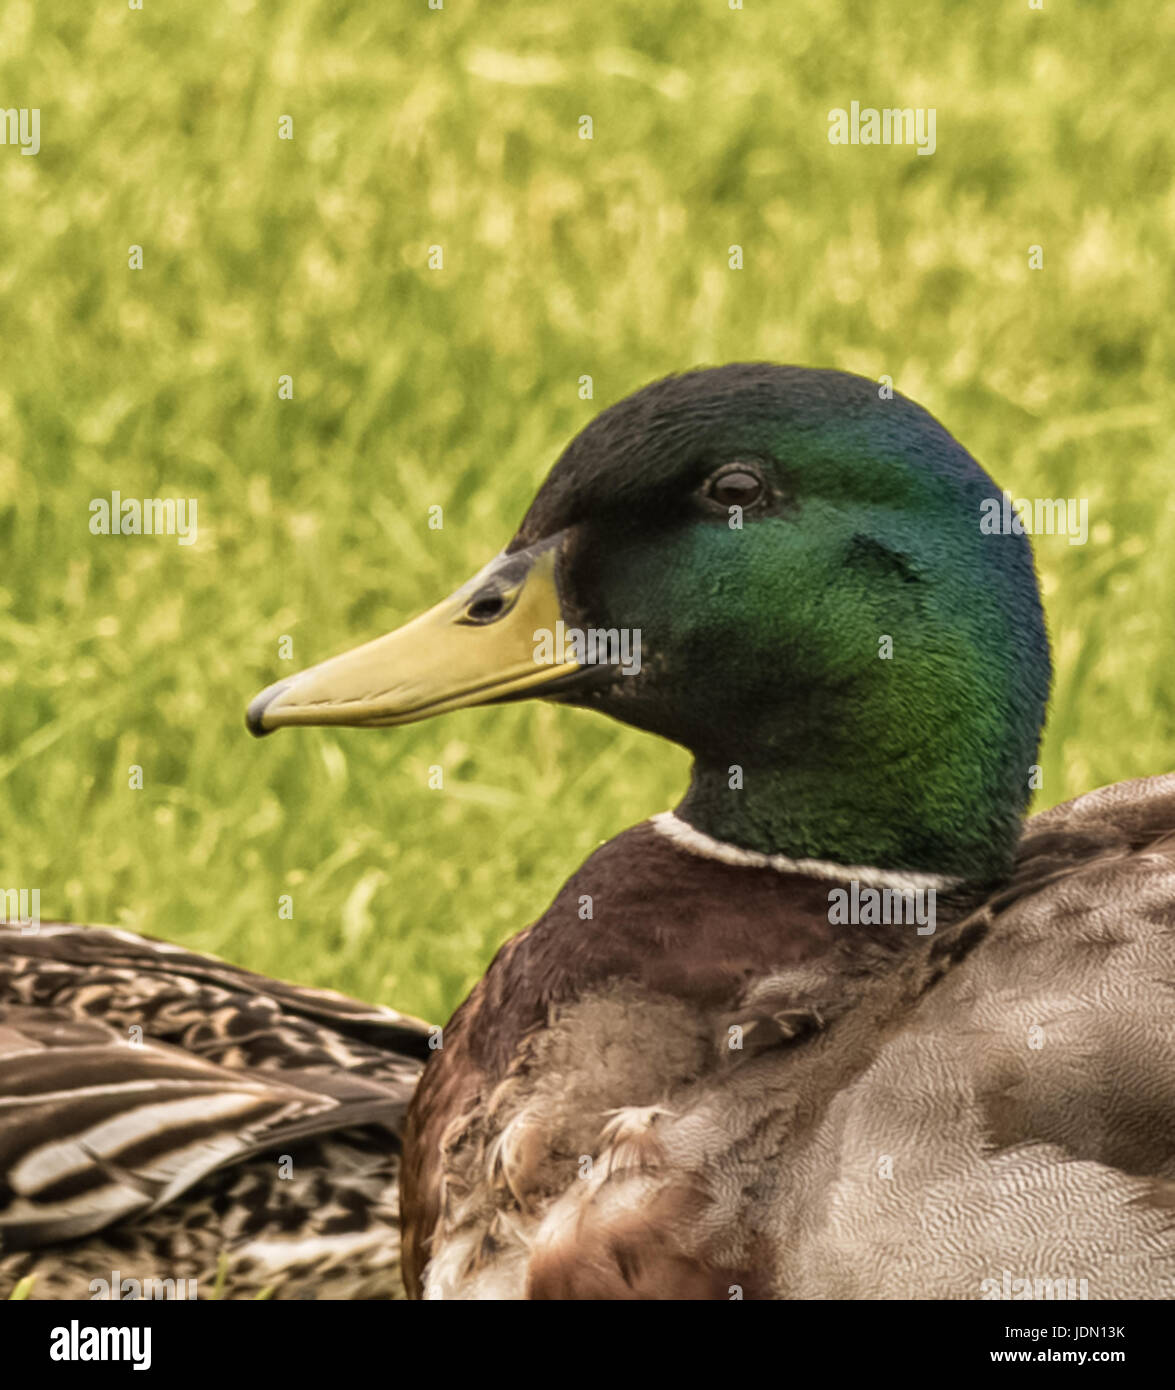 head and shoulders of a duck with green and brown plumage. Stock Photo